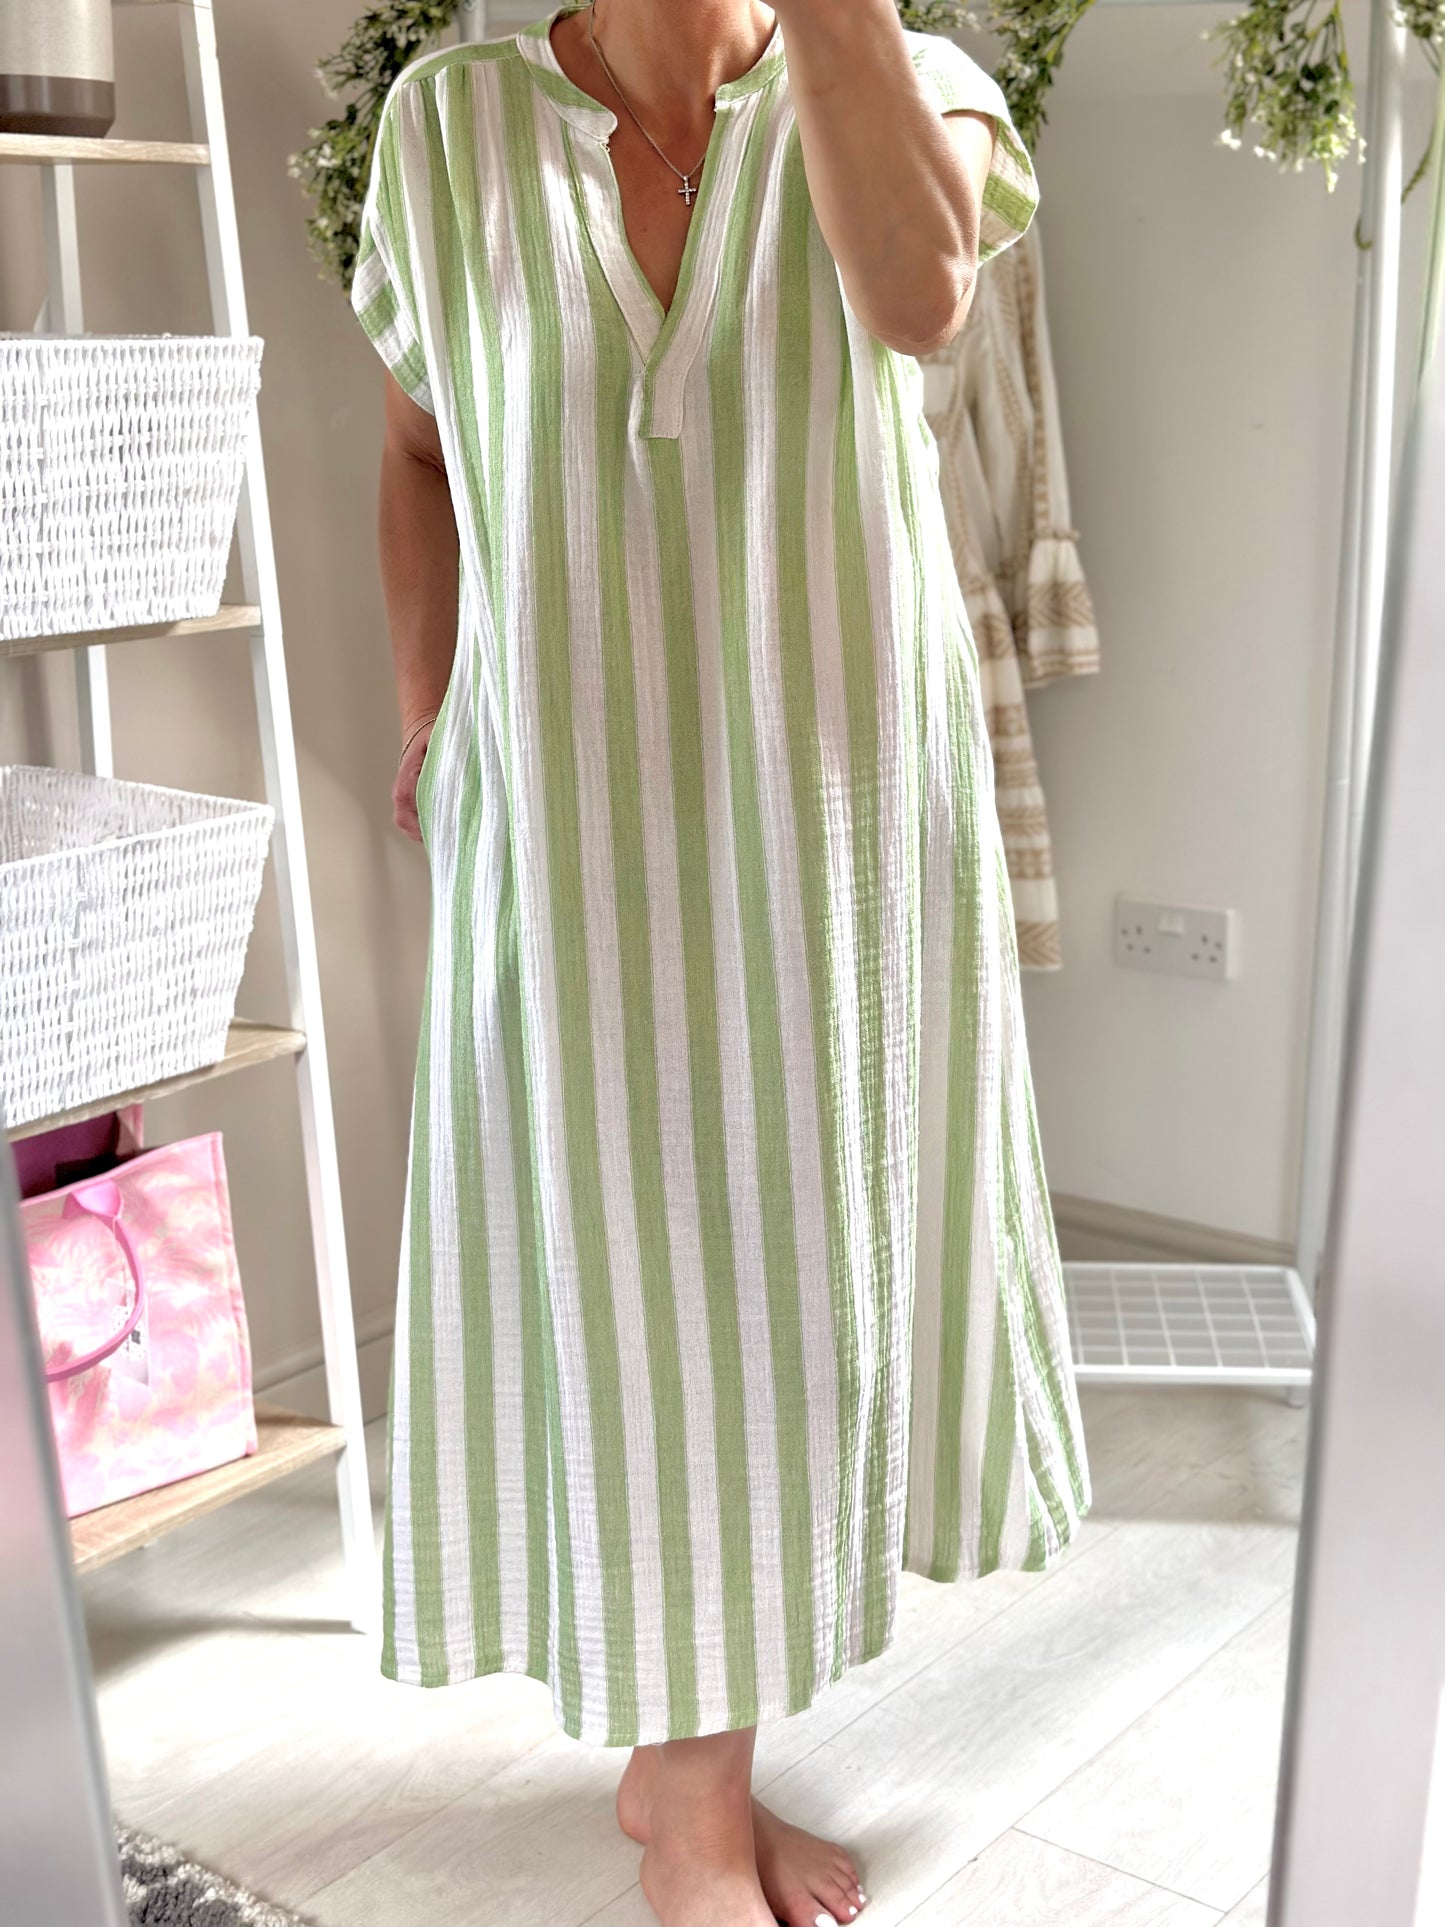 Made in Italy Green and Beige Stripe V Neck Dress